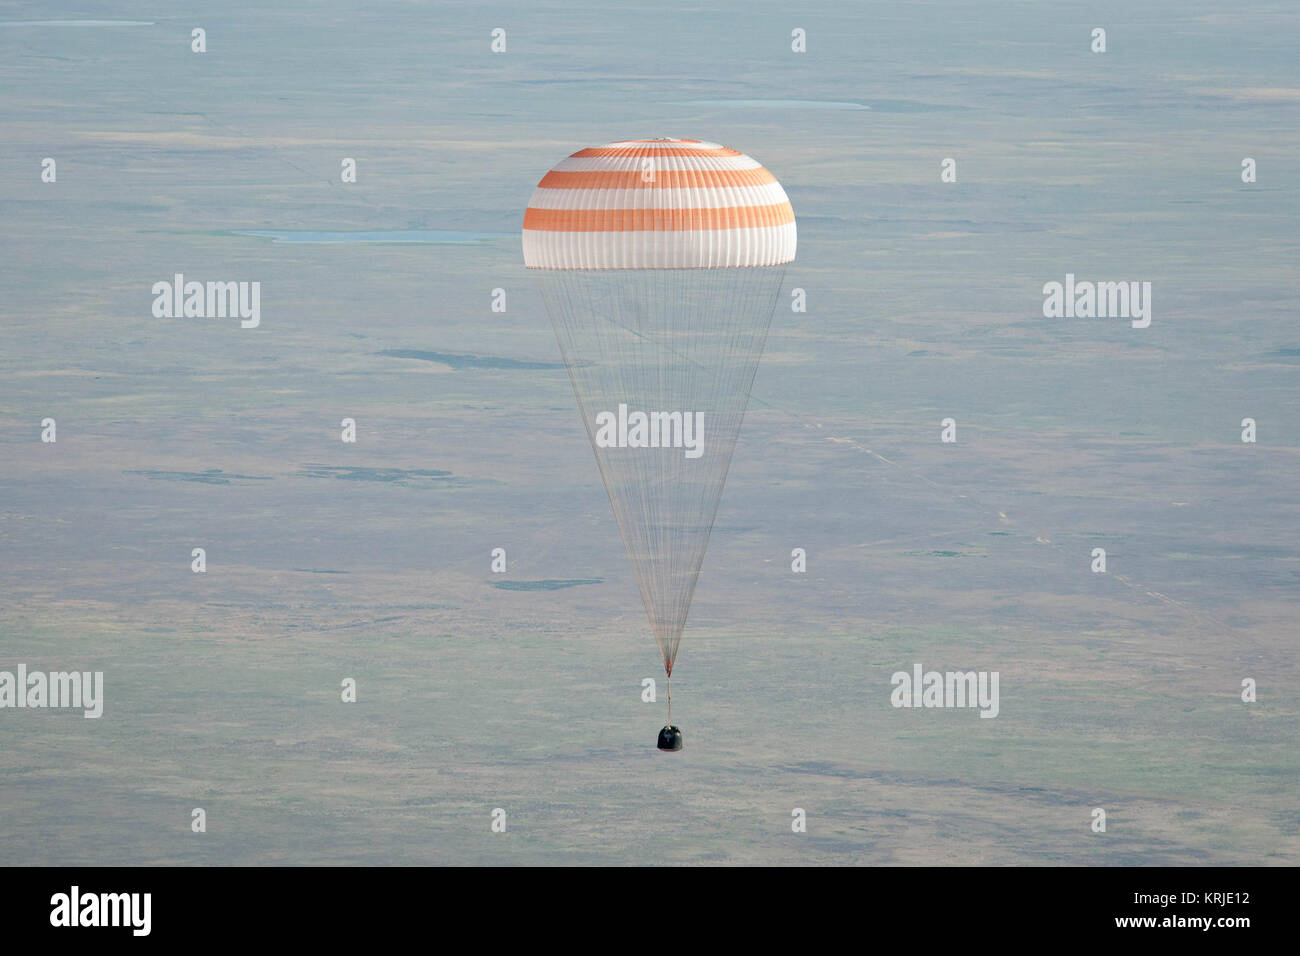 The Soyuz TMA-20 spacecraft is seen as it lands with Expedition 27 Commander Dmitry Kondratyev and Flight Engineers Paolo Nespoli and Cady Coleman in a remote area southeast of the town of Zhezkazgan, Kazakhstan, on Tuesday, May 24, 2011.   NASA Astronaut Coleman, Russian Cosmonaut Kondratyev and Italian Astronaut Nespoli are returning from more than five months onboard the International Space Station where they served as members of the Expedition 26 and 27 crews. Photo Credit: (NASA/Bill Ingalls) Soyuz TMA-20 capsule descends toward landing Stock Photo